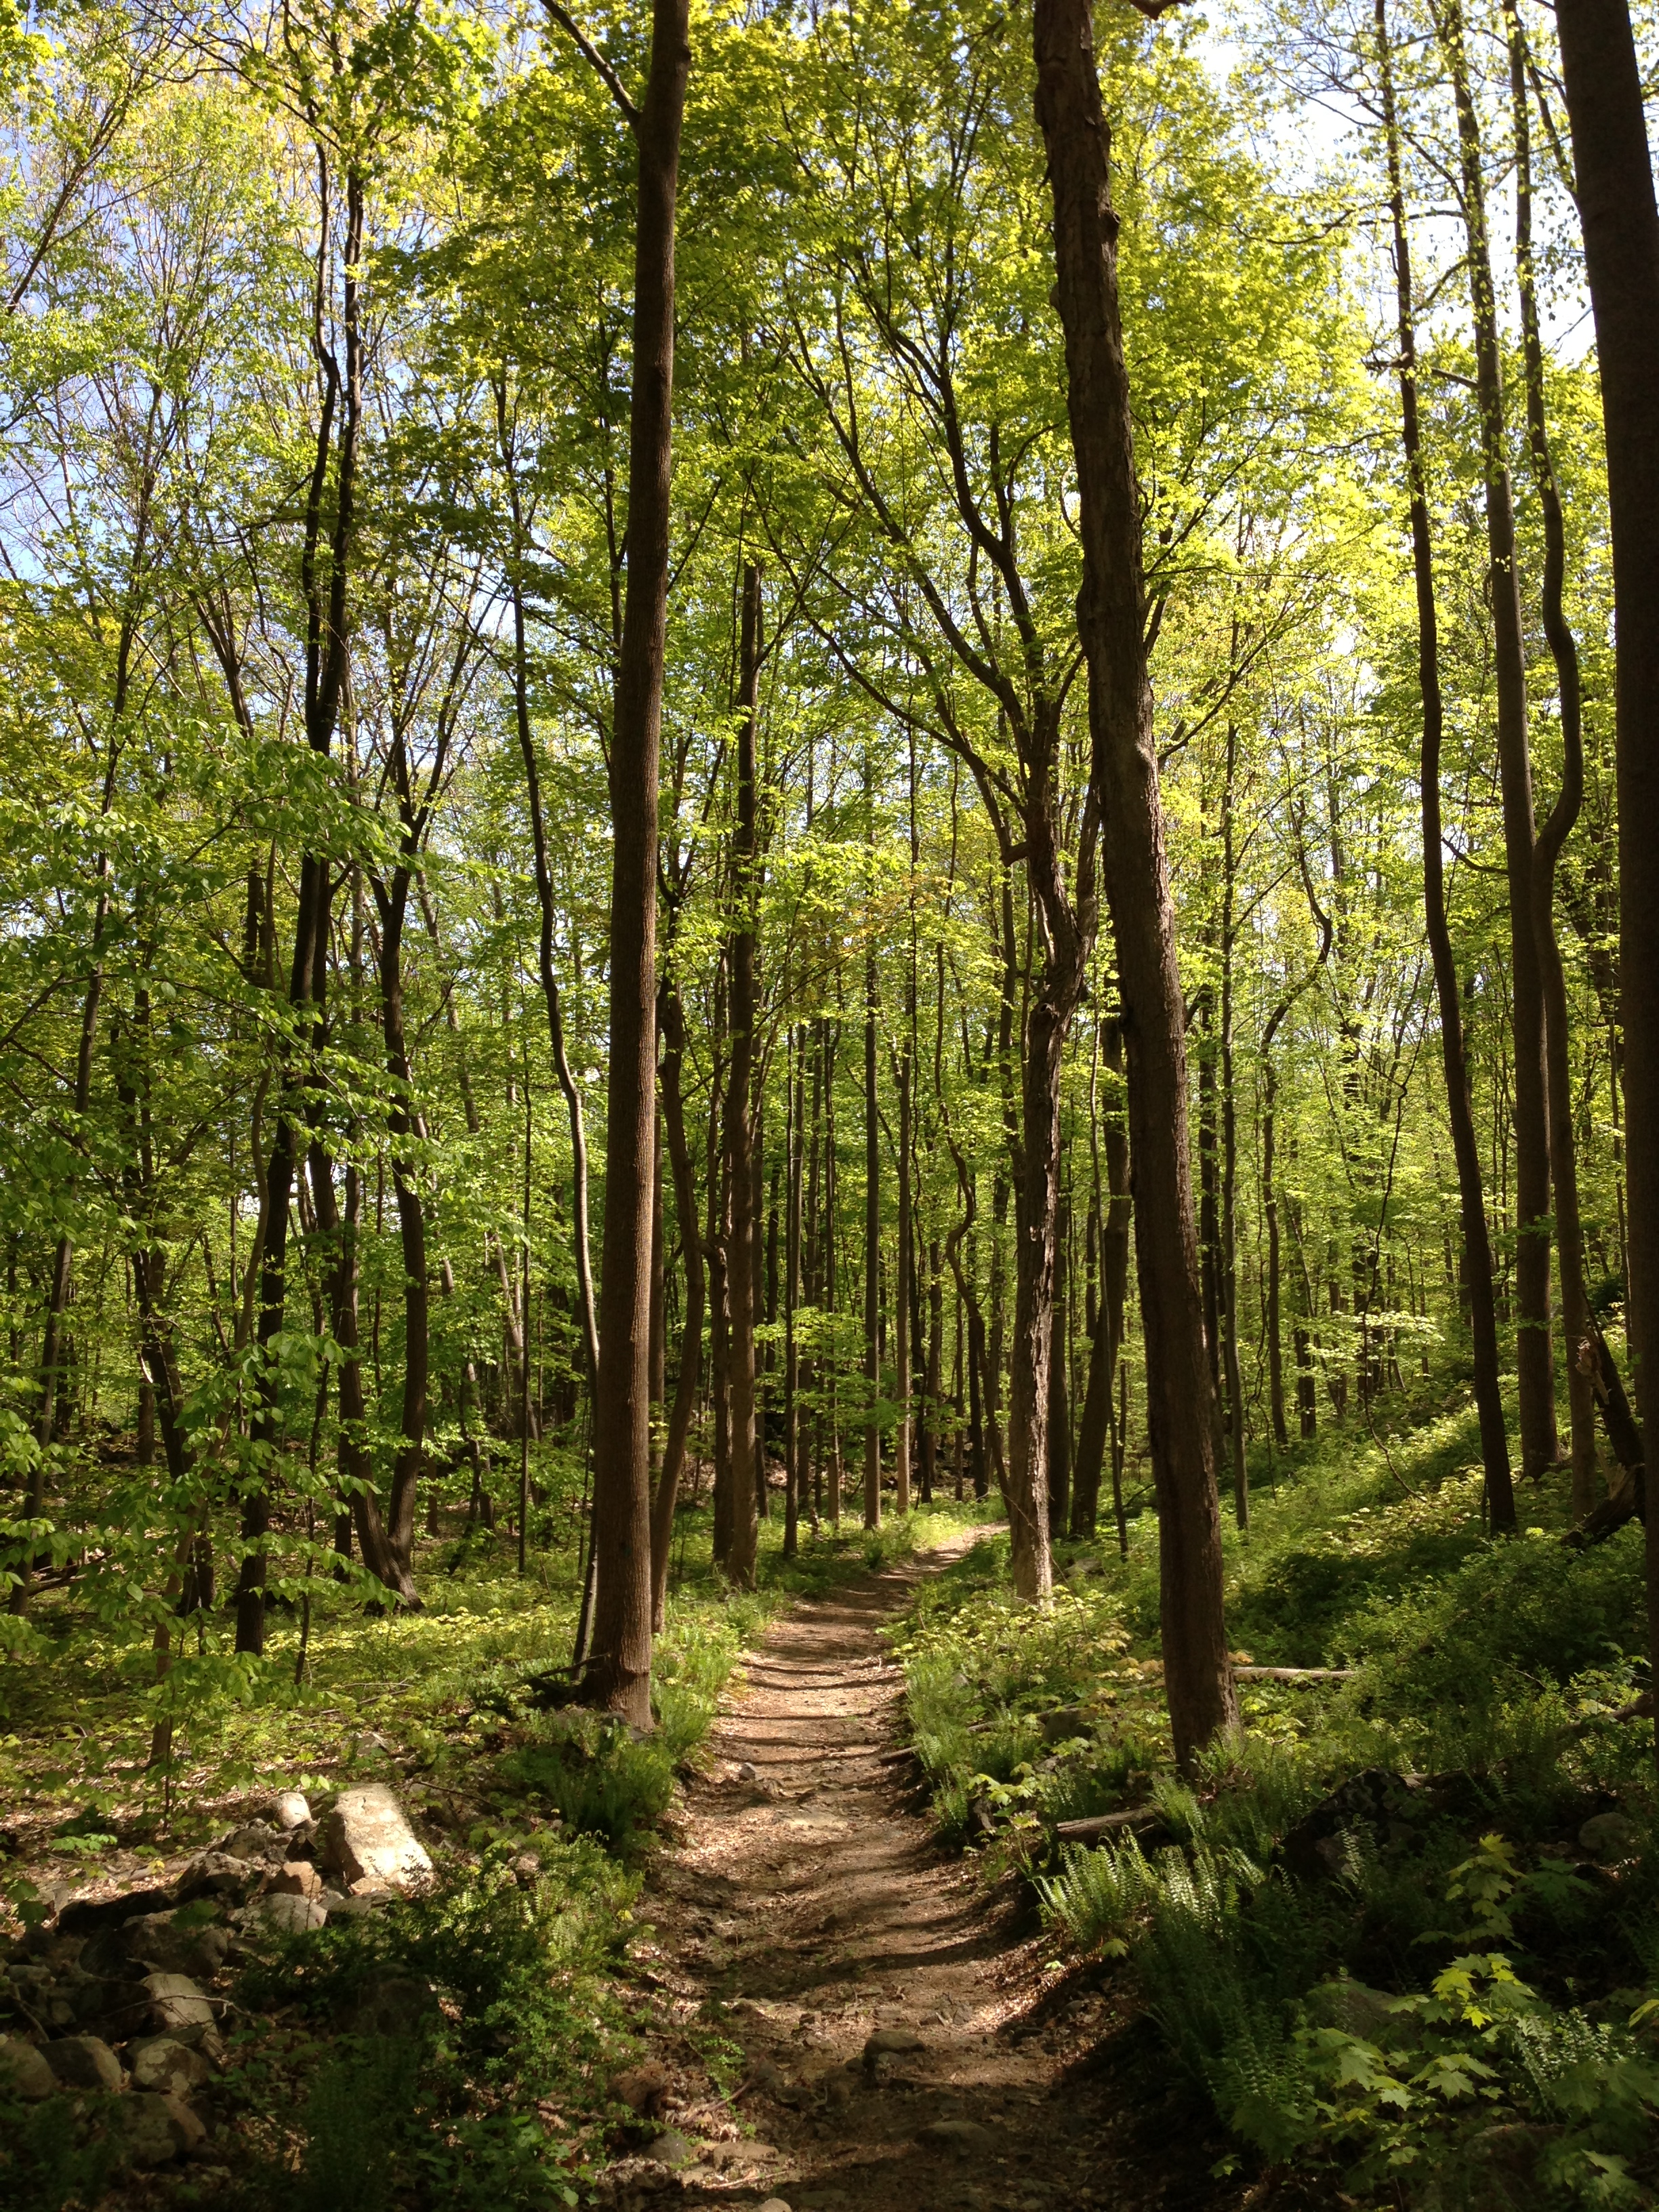 File:2013-05-06 15 15 34 Thick forest while hiking south along the ...